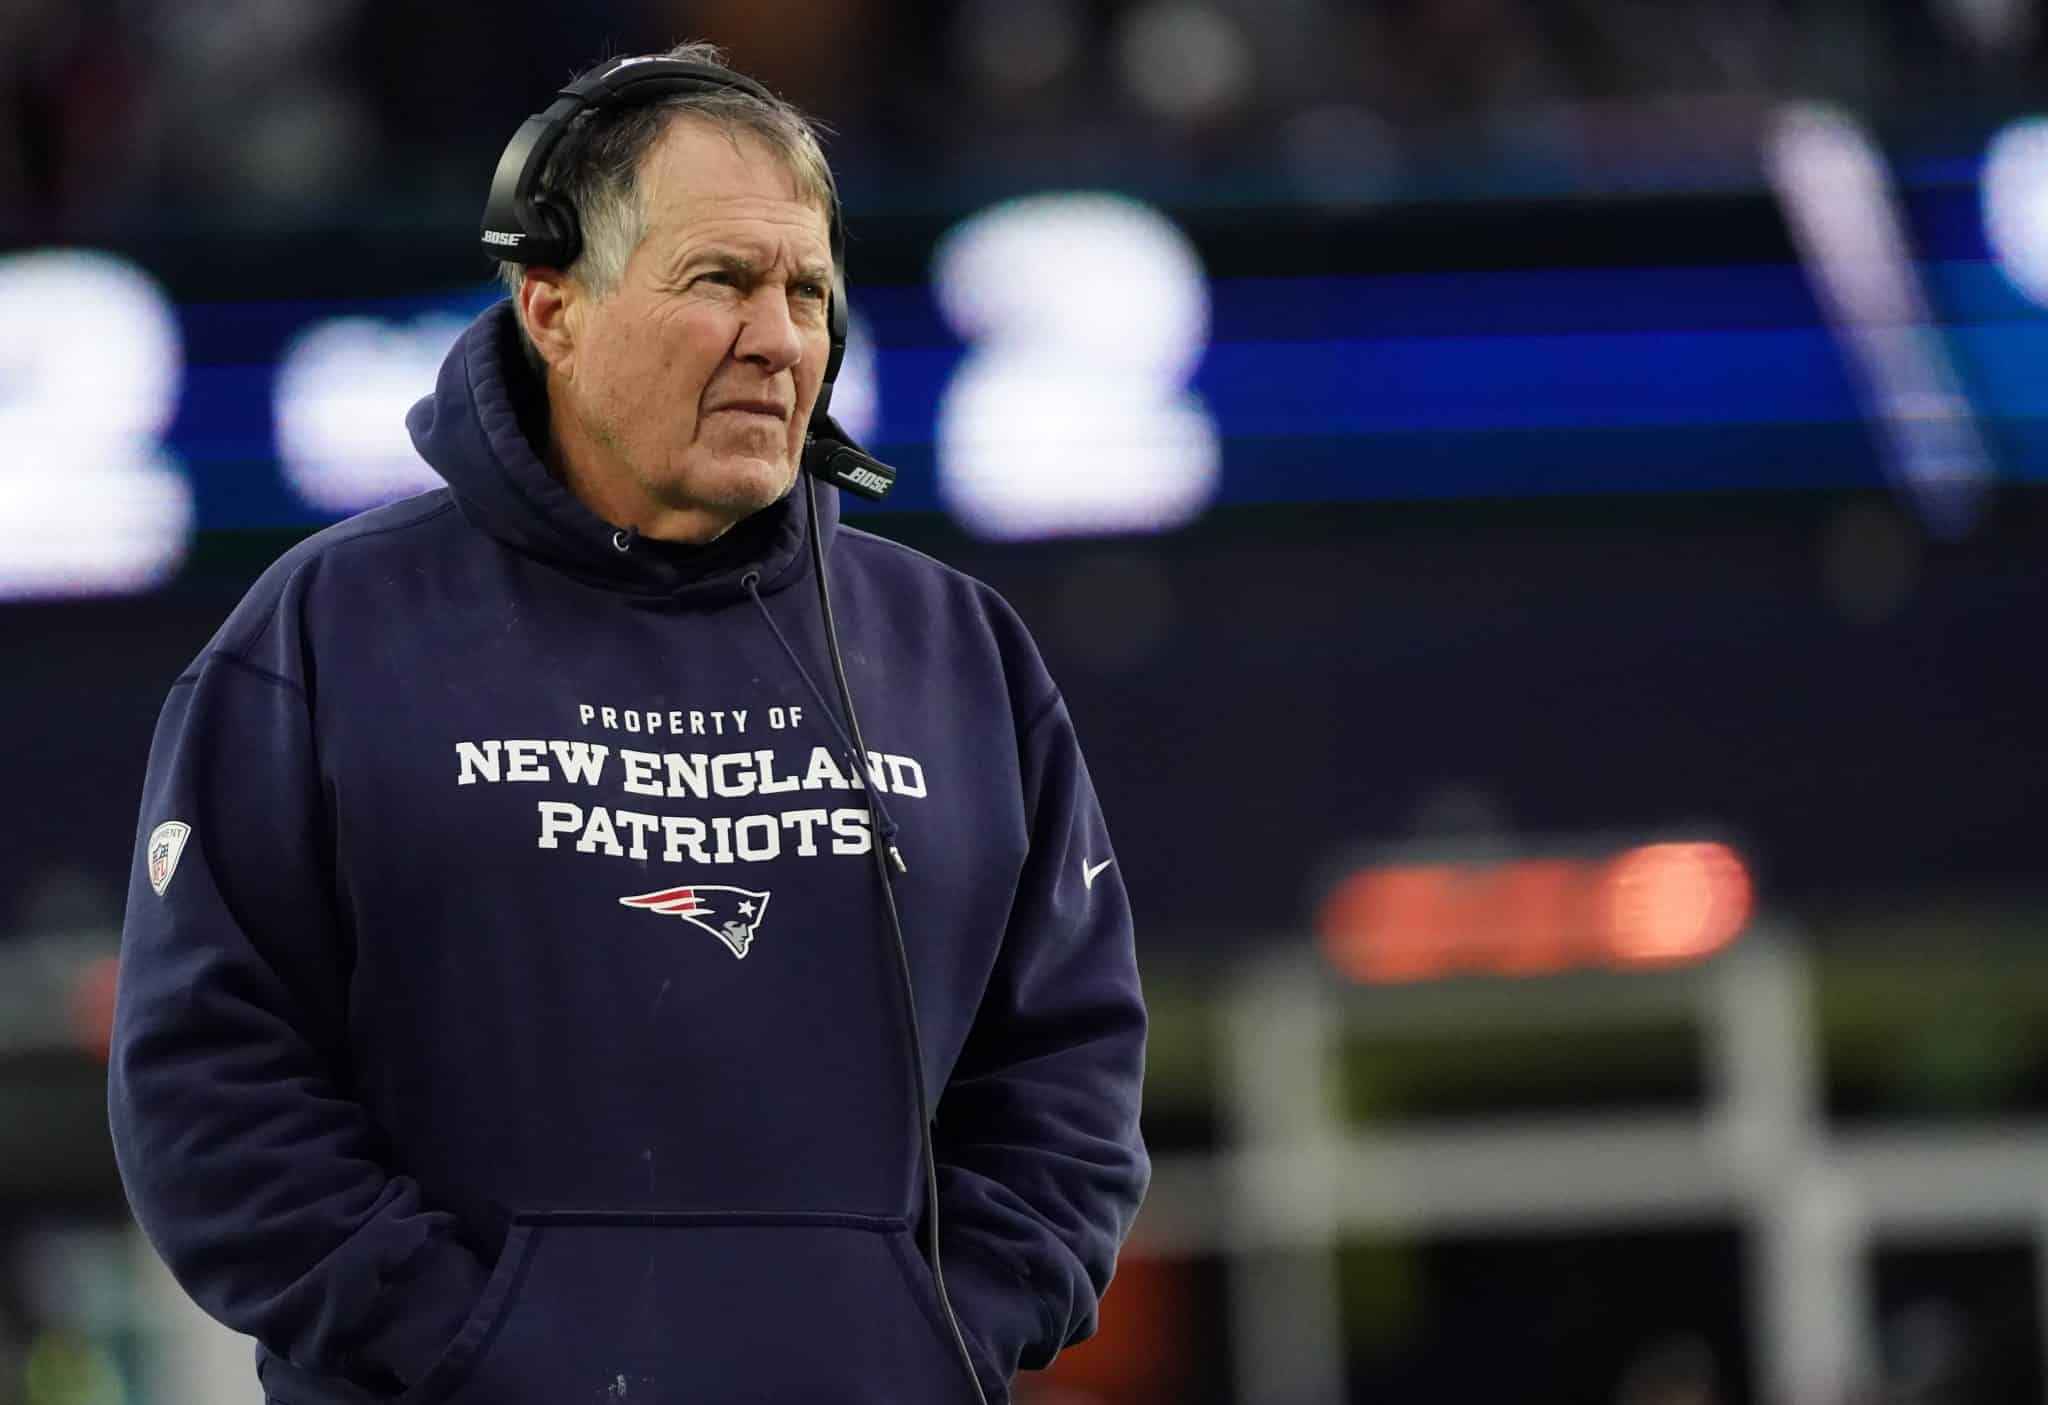 NBA-style draft lottery is NFL’s next offseason frontier. Give us Bill Belichick trading ping-pong balls - Elite Sports NY